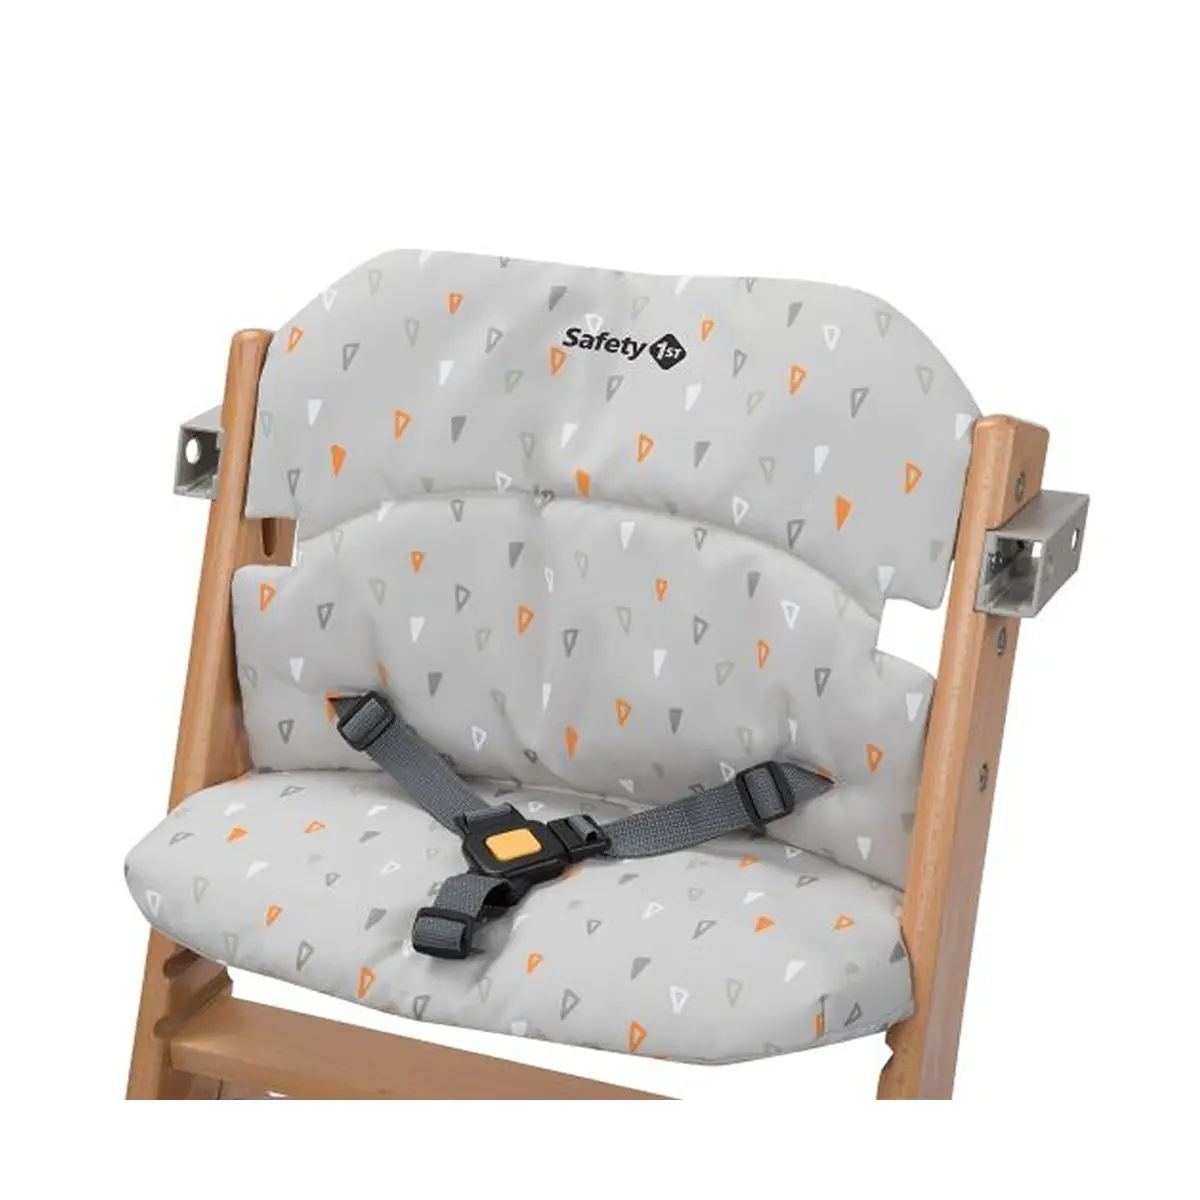 Safety 1st Timba Comfort Cushion